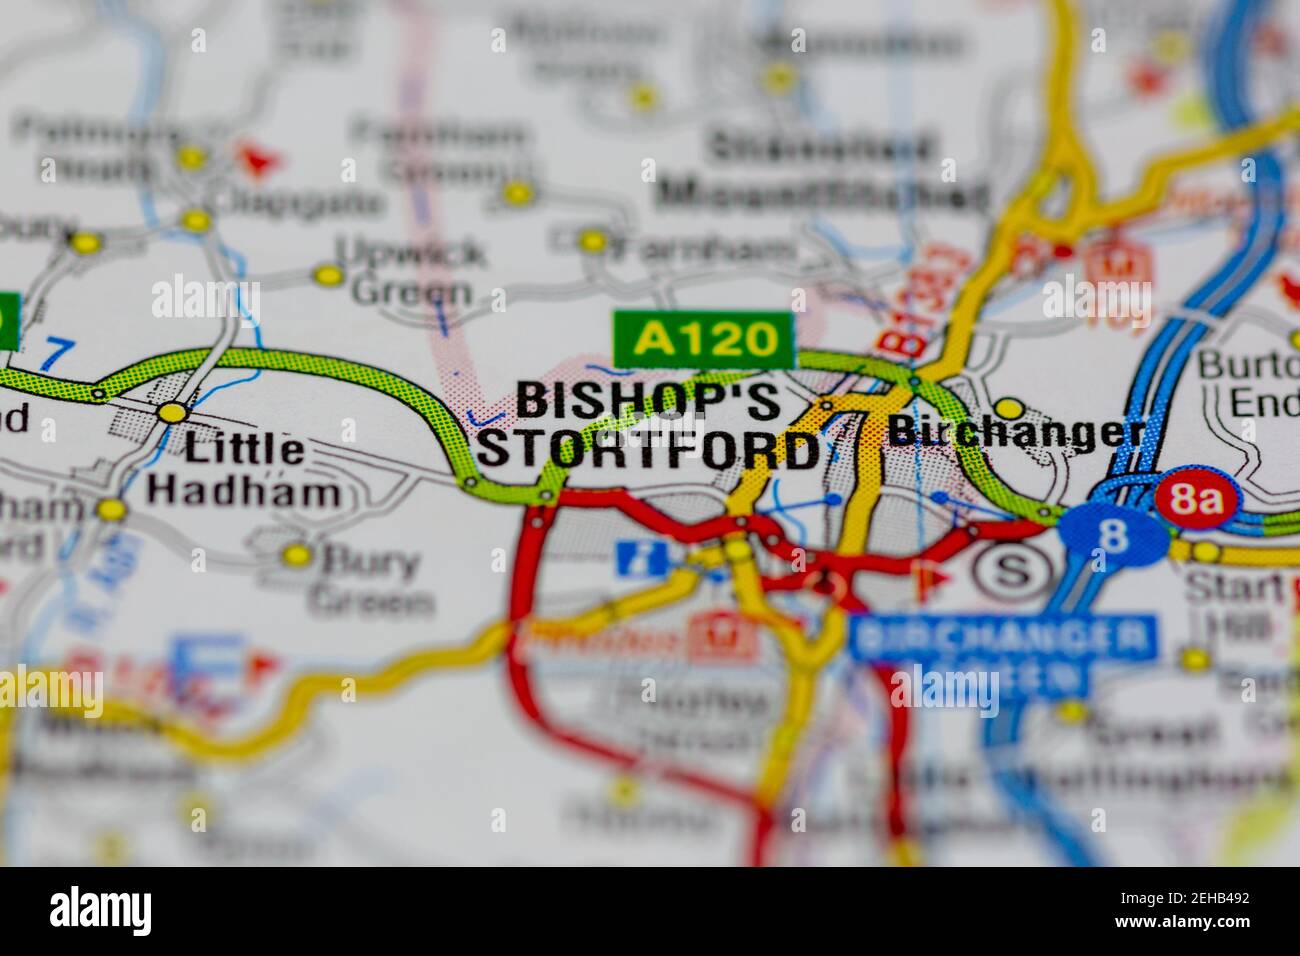 Bishops stortford and surrounding areas shown on a road map or Geography map Stock Photo